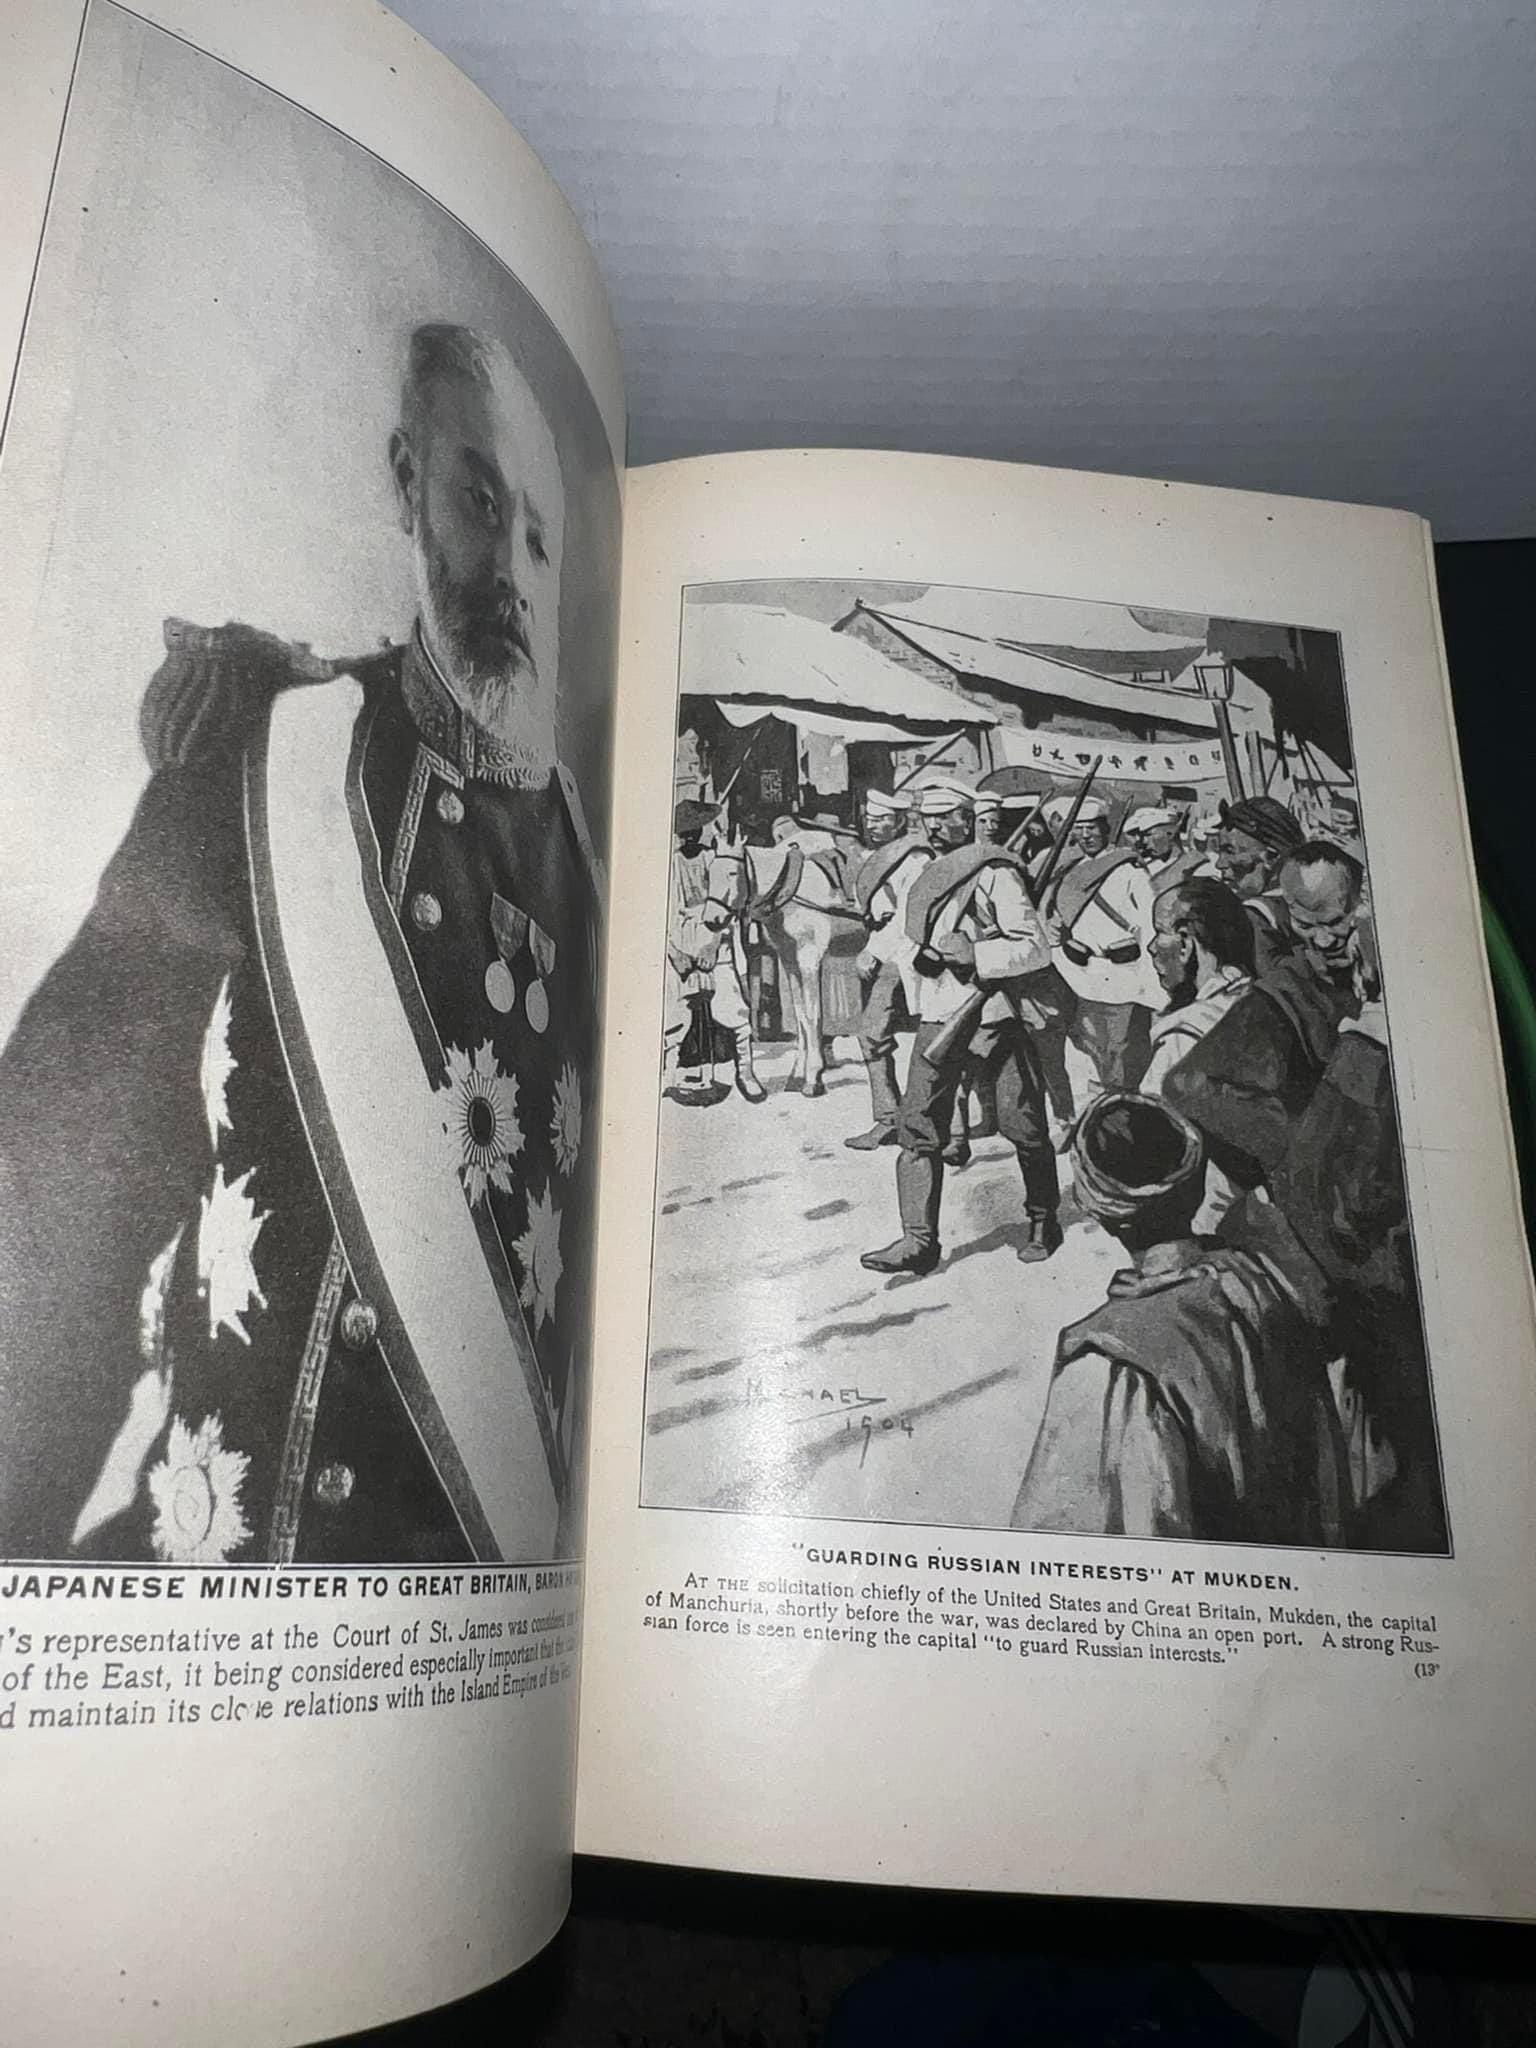 Antique 1904 Exciting experiences in the Japanese-Russian war history